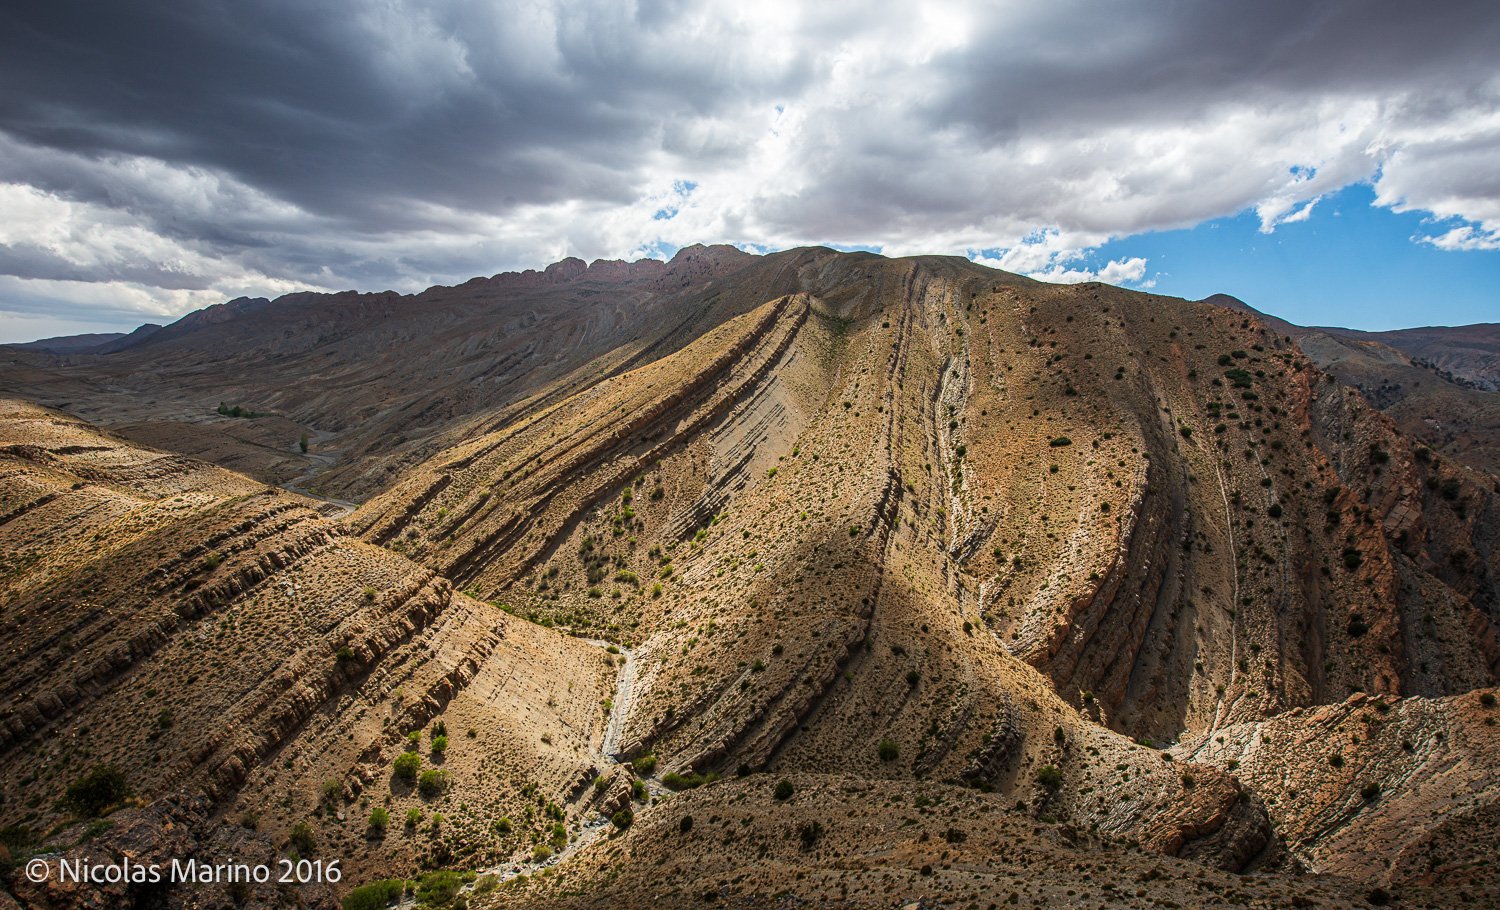  Canyons of the High-Atlas. Morocco 